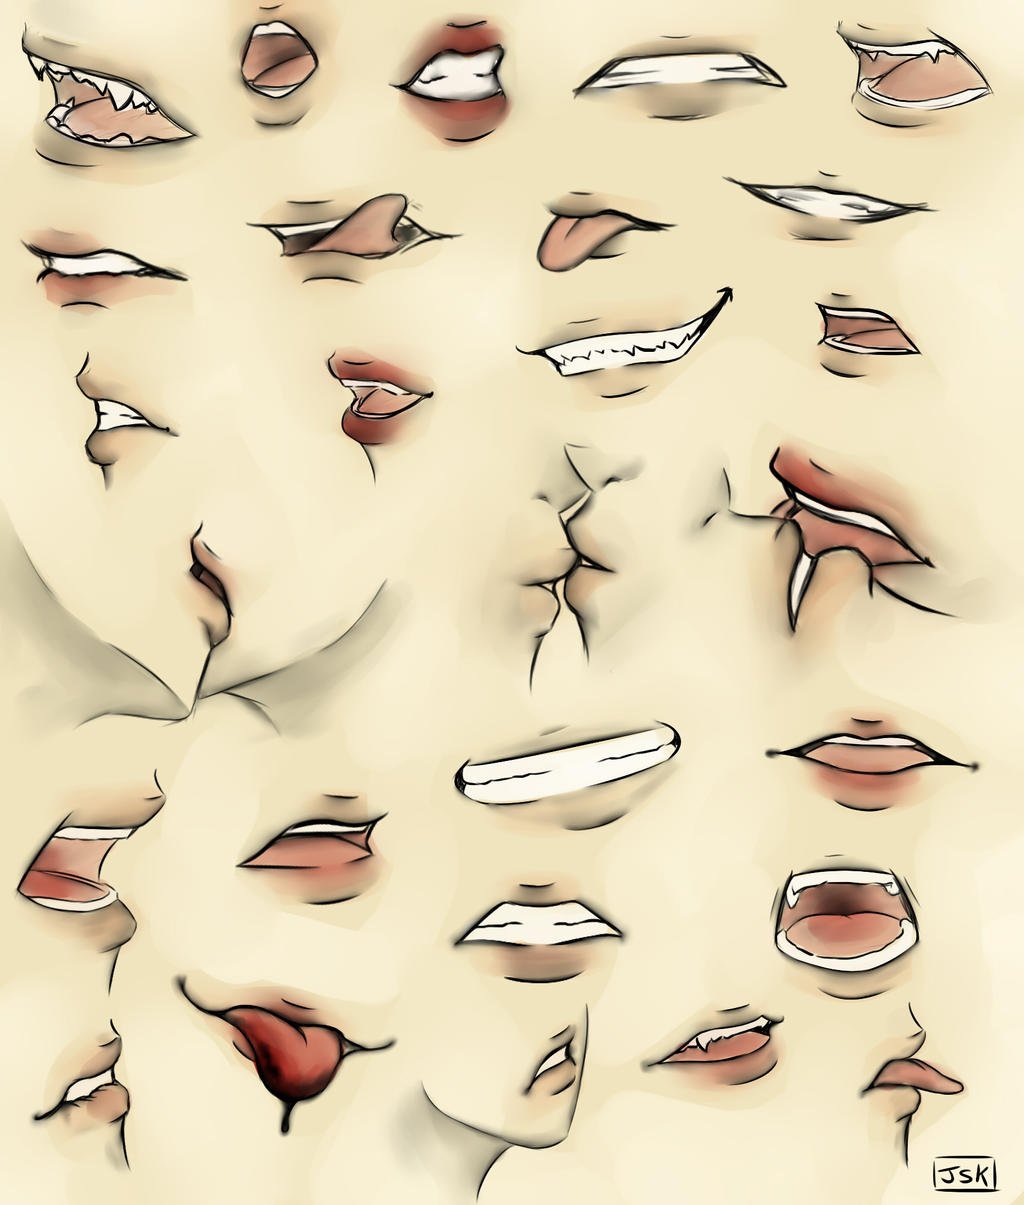 Mouth Practice by Juuria66 on DeviantArt